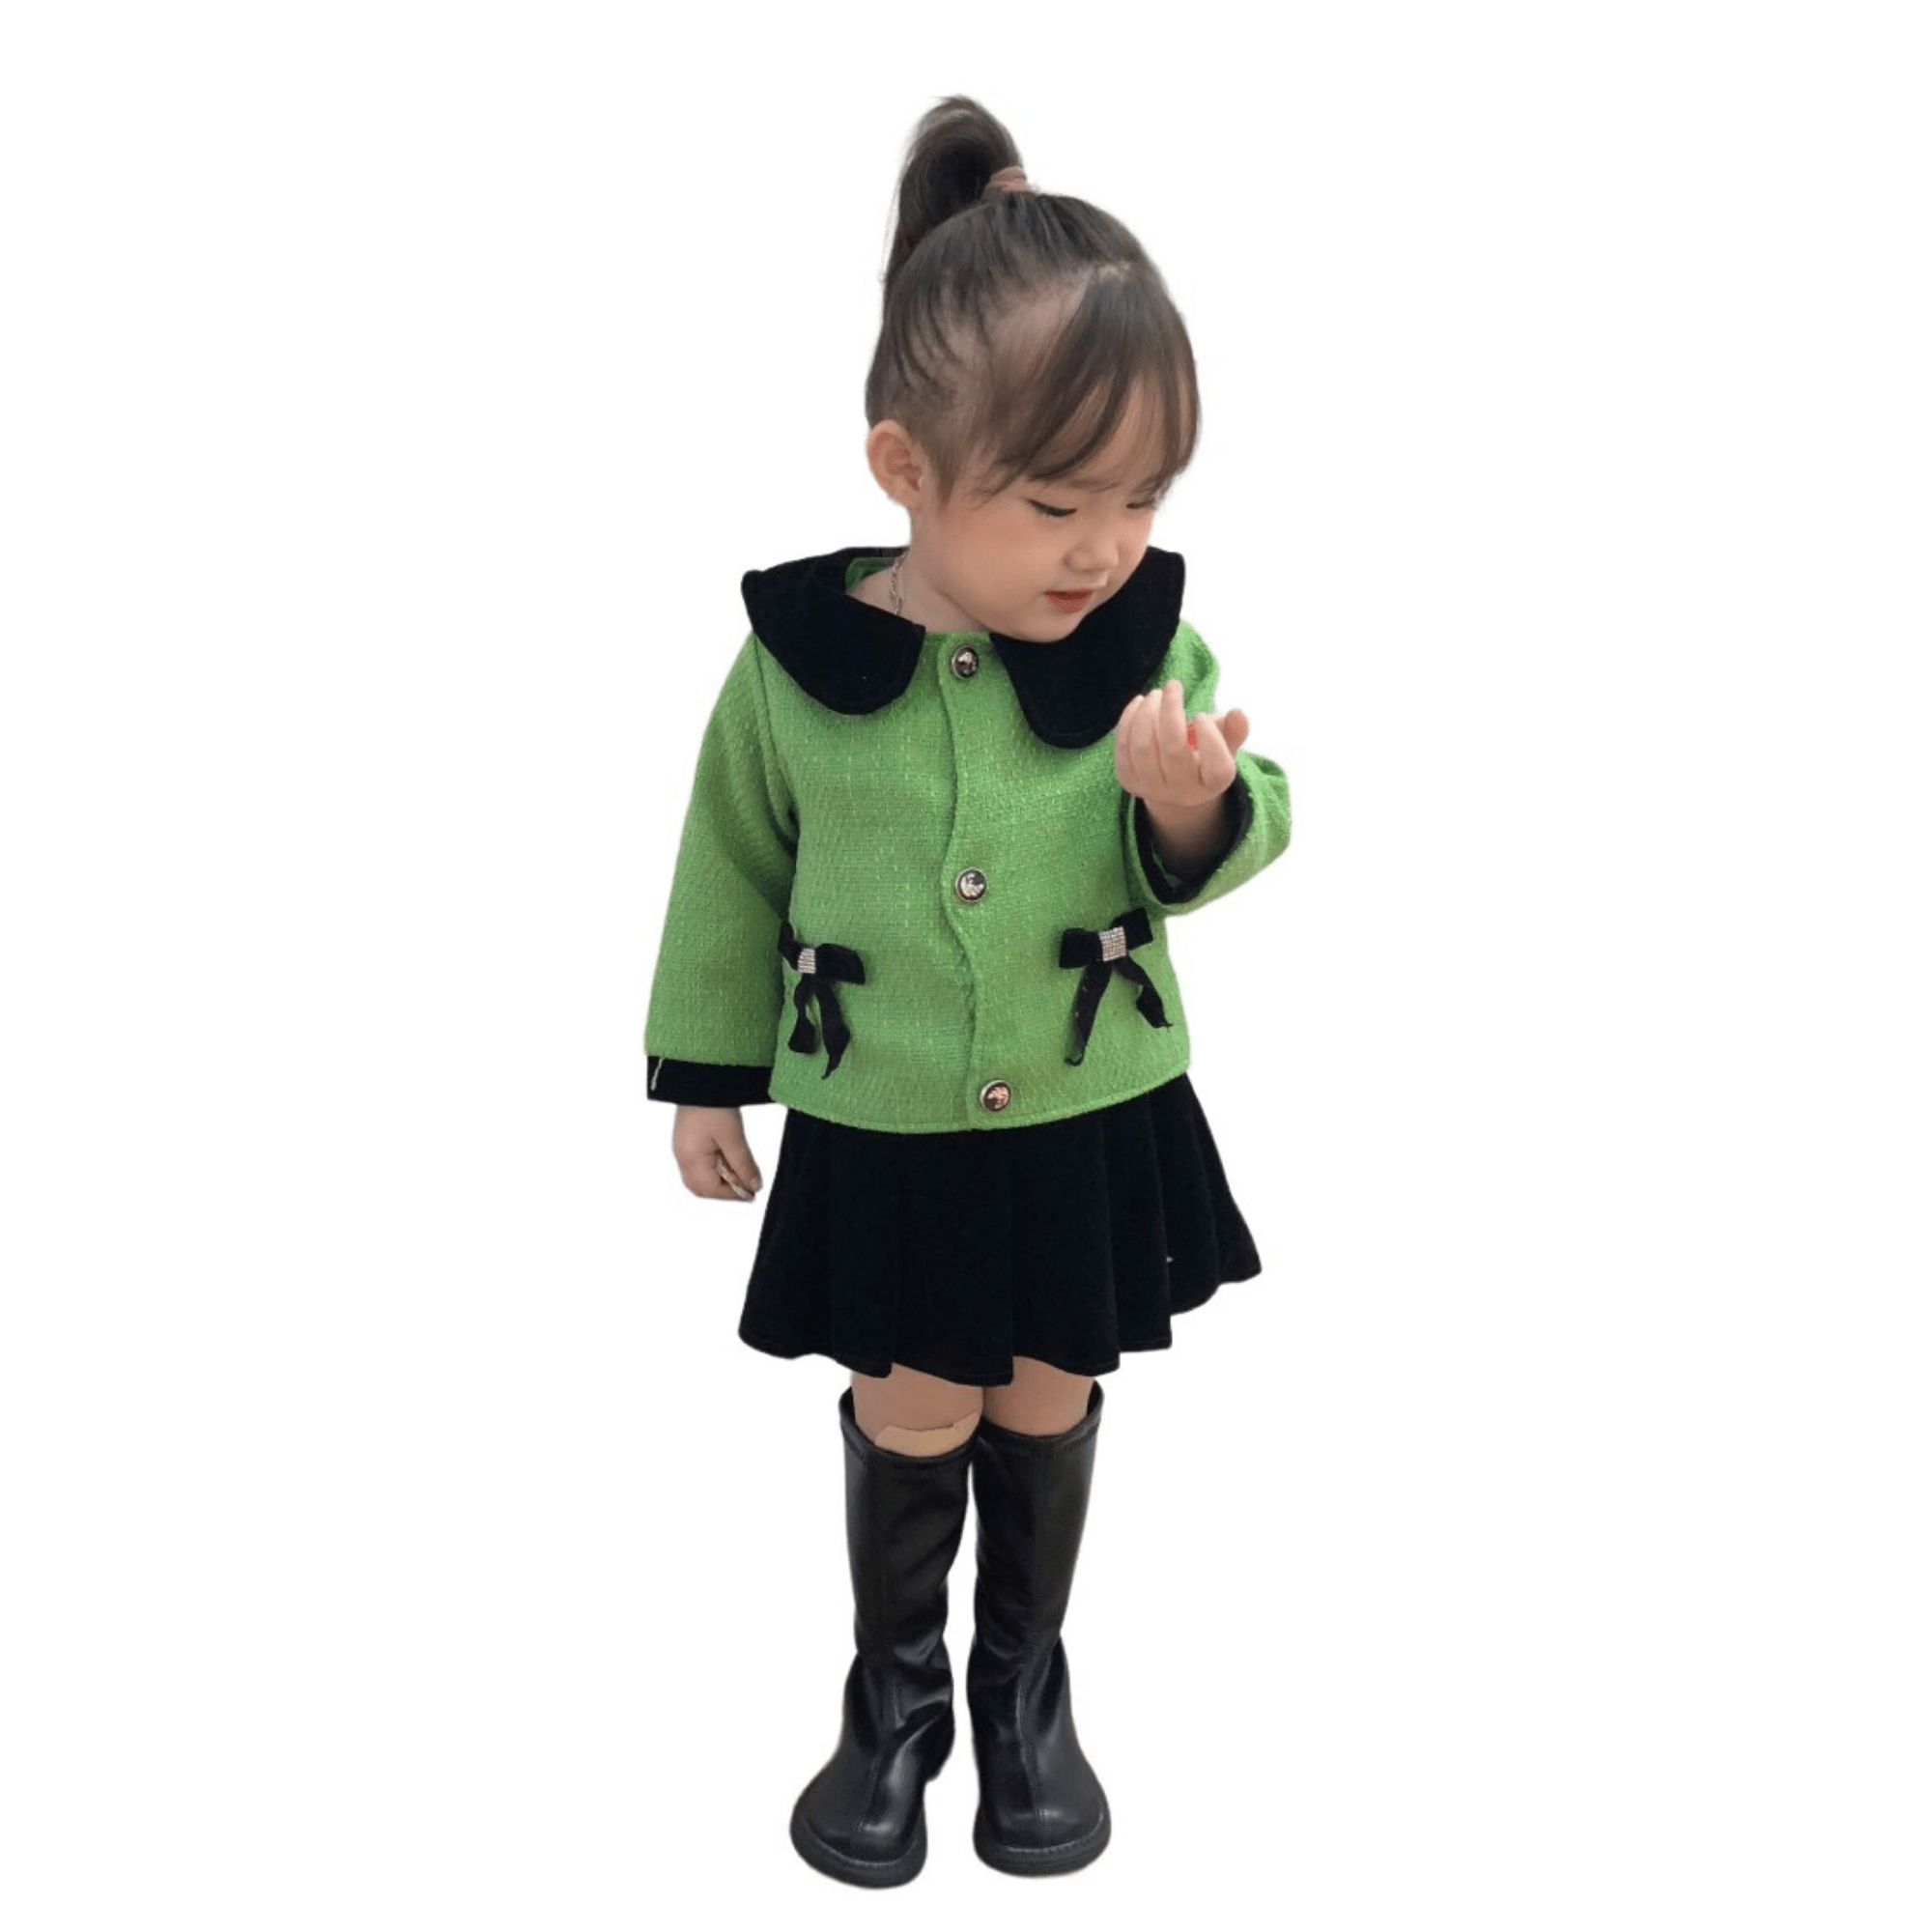 Clothes For Kids Girls Comfortable 100% Wool Dresses Cute Each One In Opp Bag From Vietnam Manufacturer 4